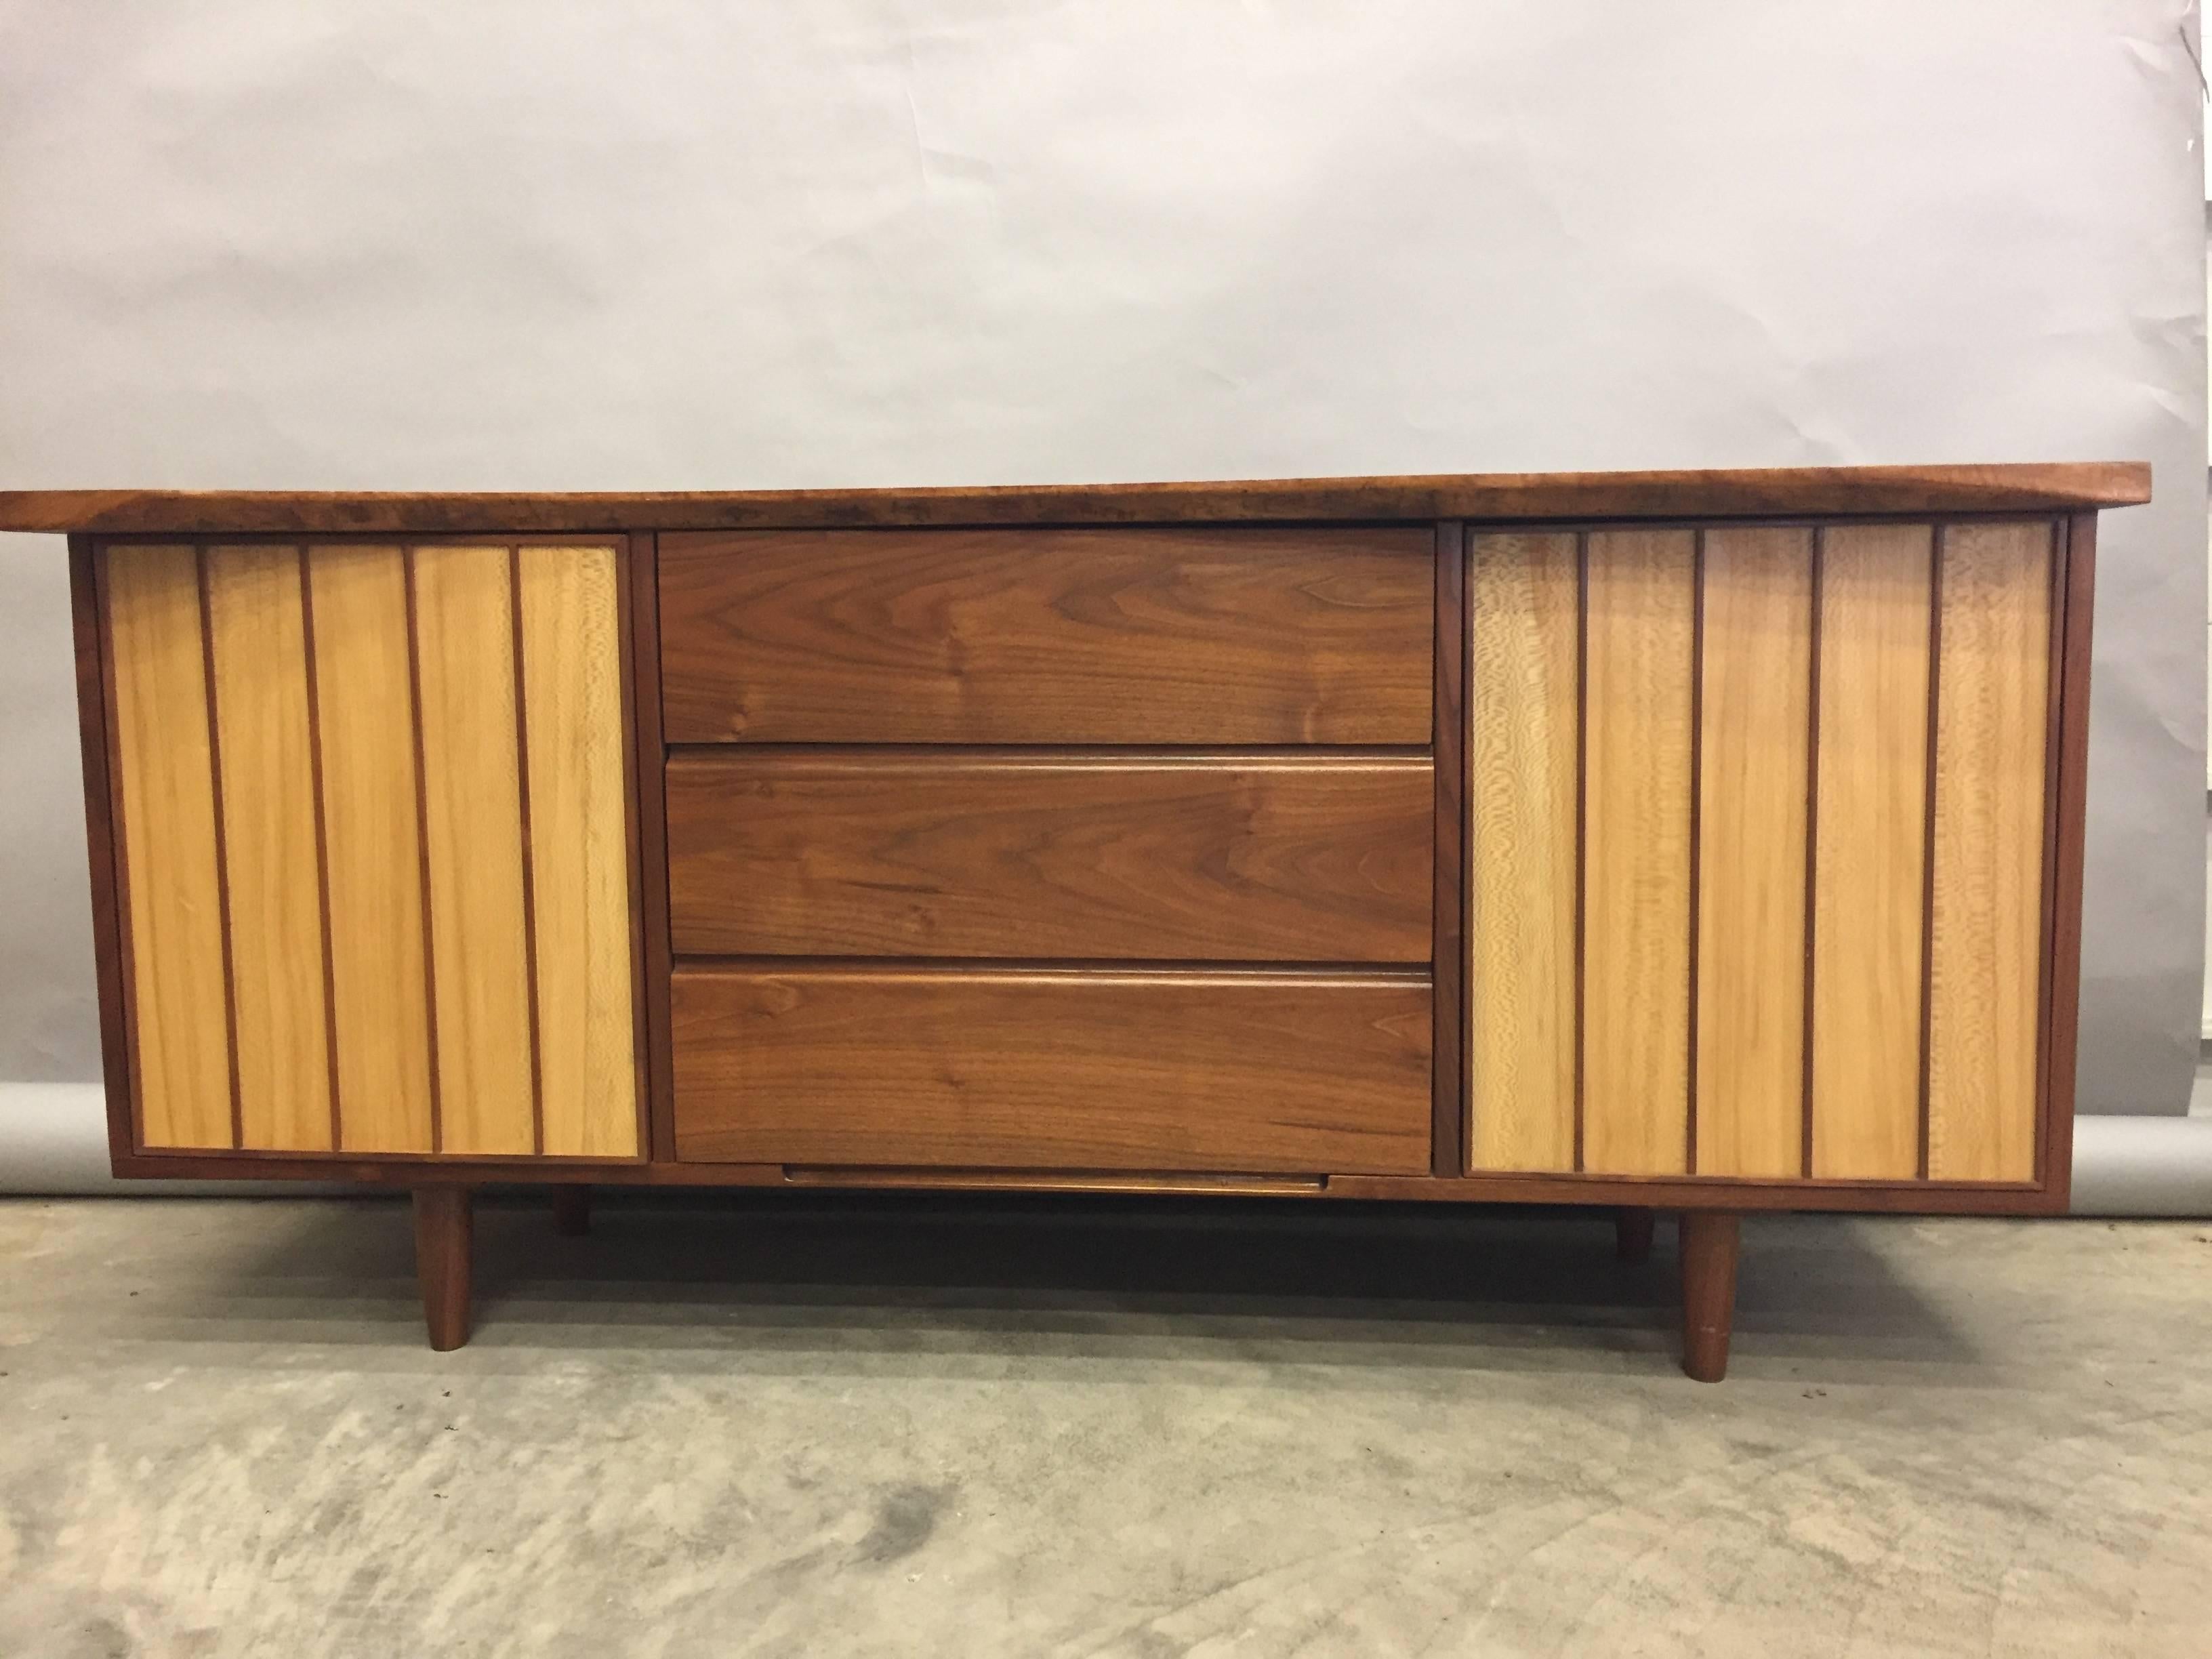 Nakashima style handmade mixed wood credenza cabinet having an organic irregular gorgeous slab of wood for the top, and below, two panels of a different kind of wood that open to reveal storage, as well as three spacious drawers, all dovetailed and